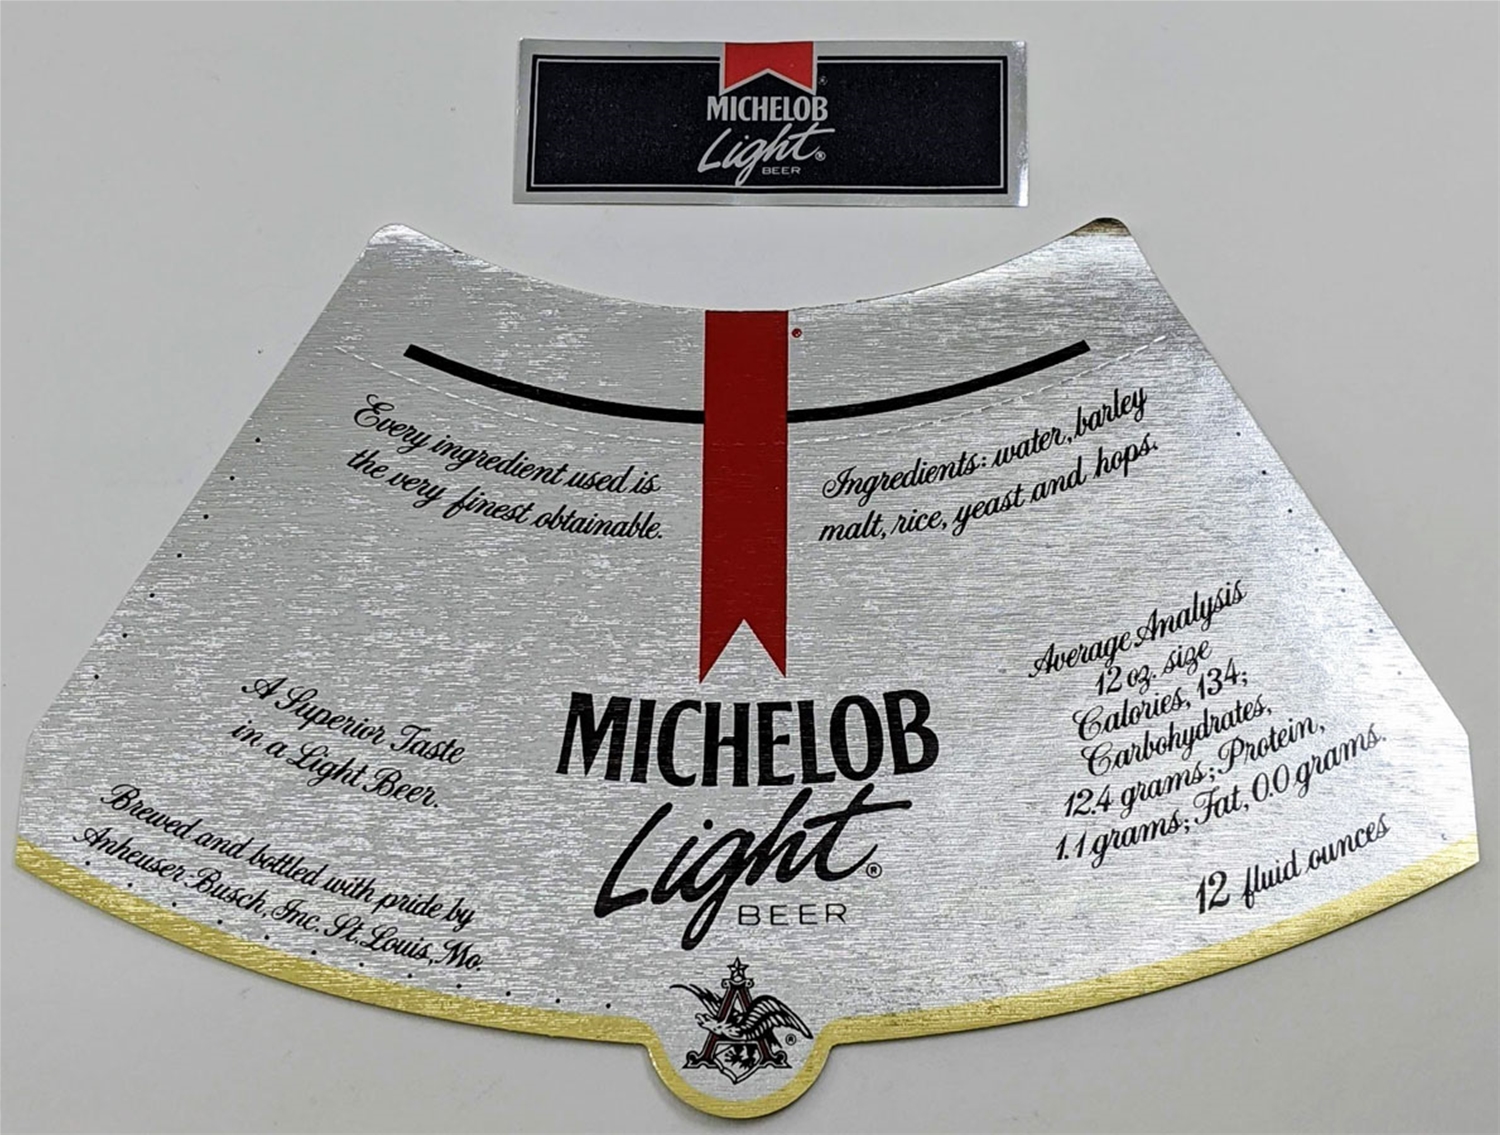 Michelob Light Label with neck label